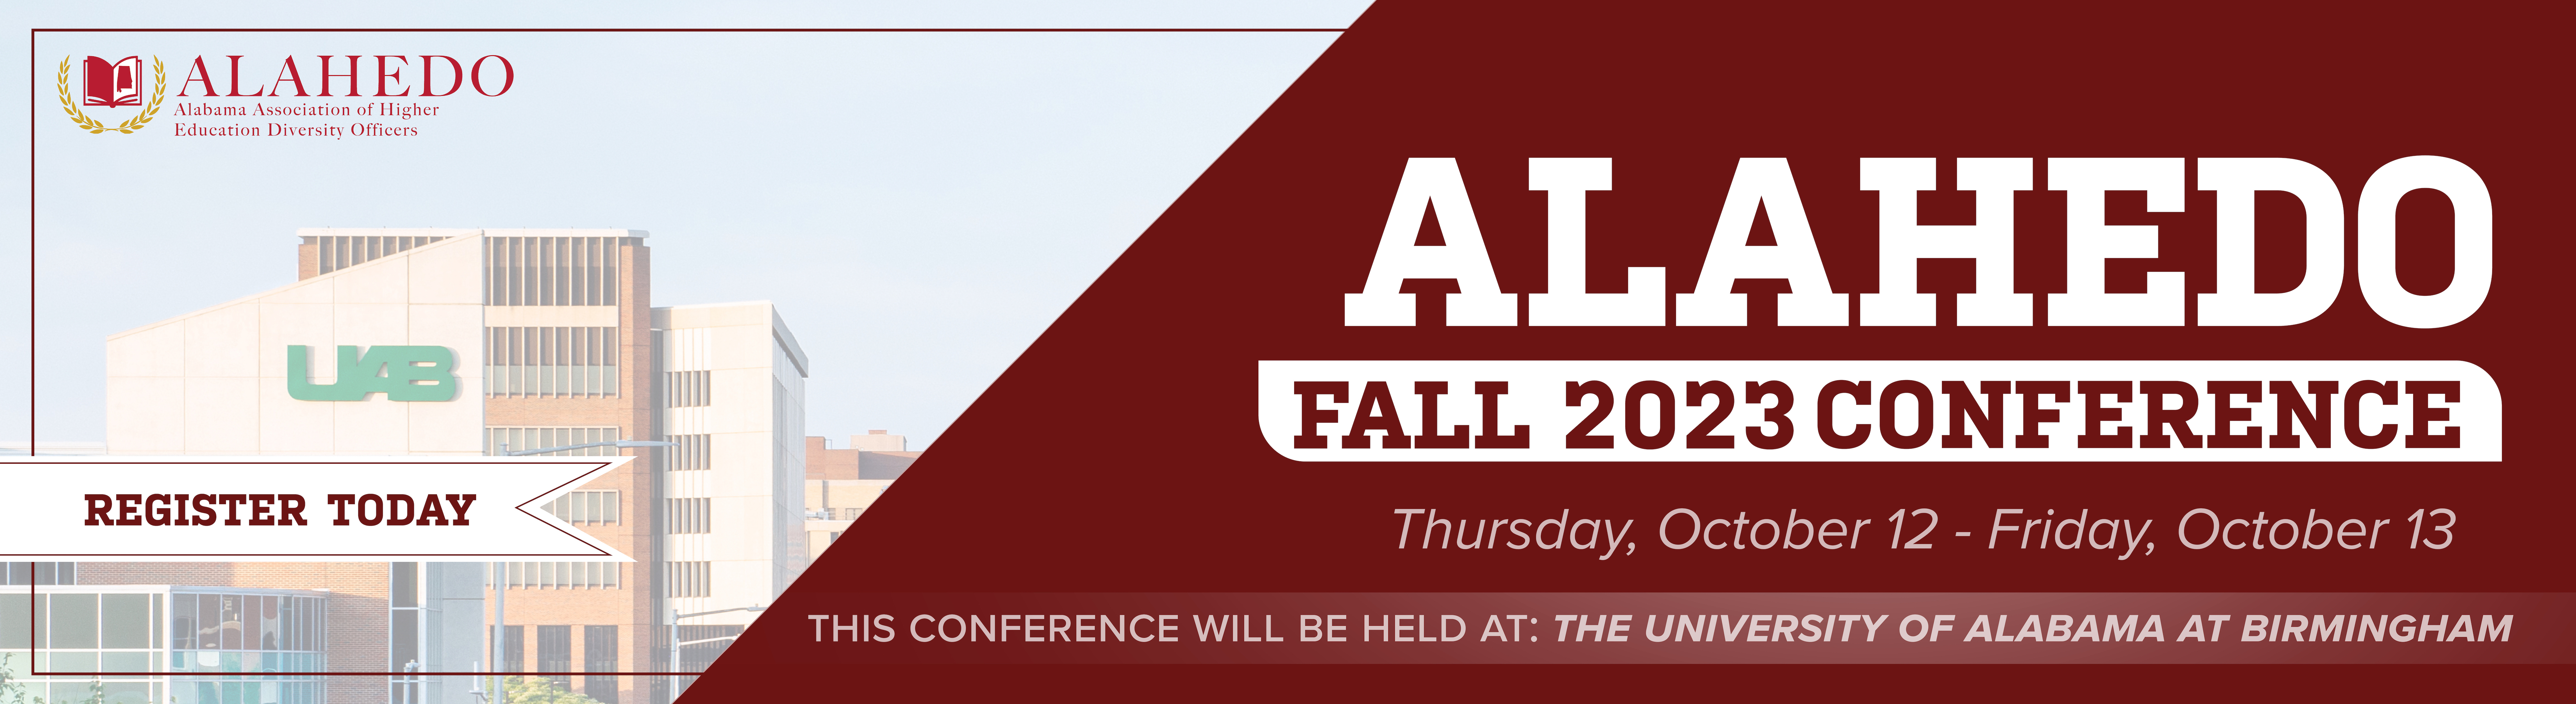 ALALHEDO Banner  Inital 2023 Fall Conference Banner